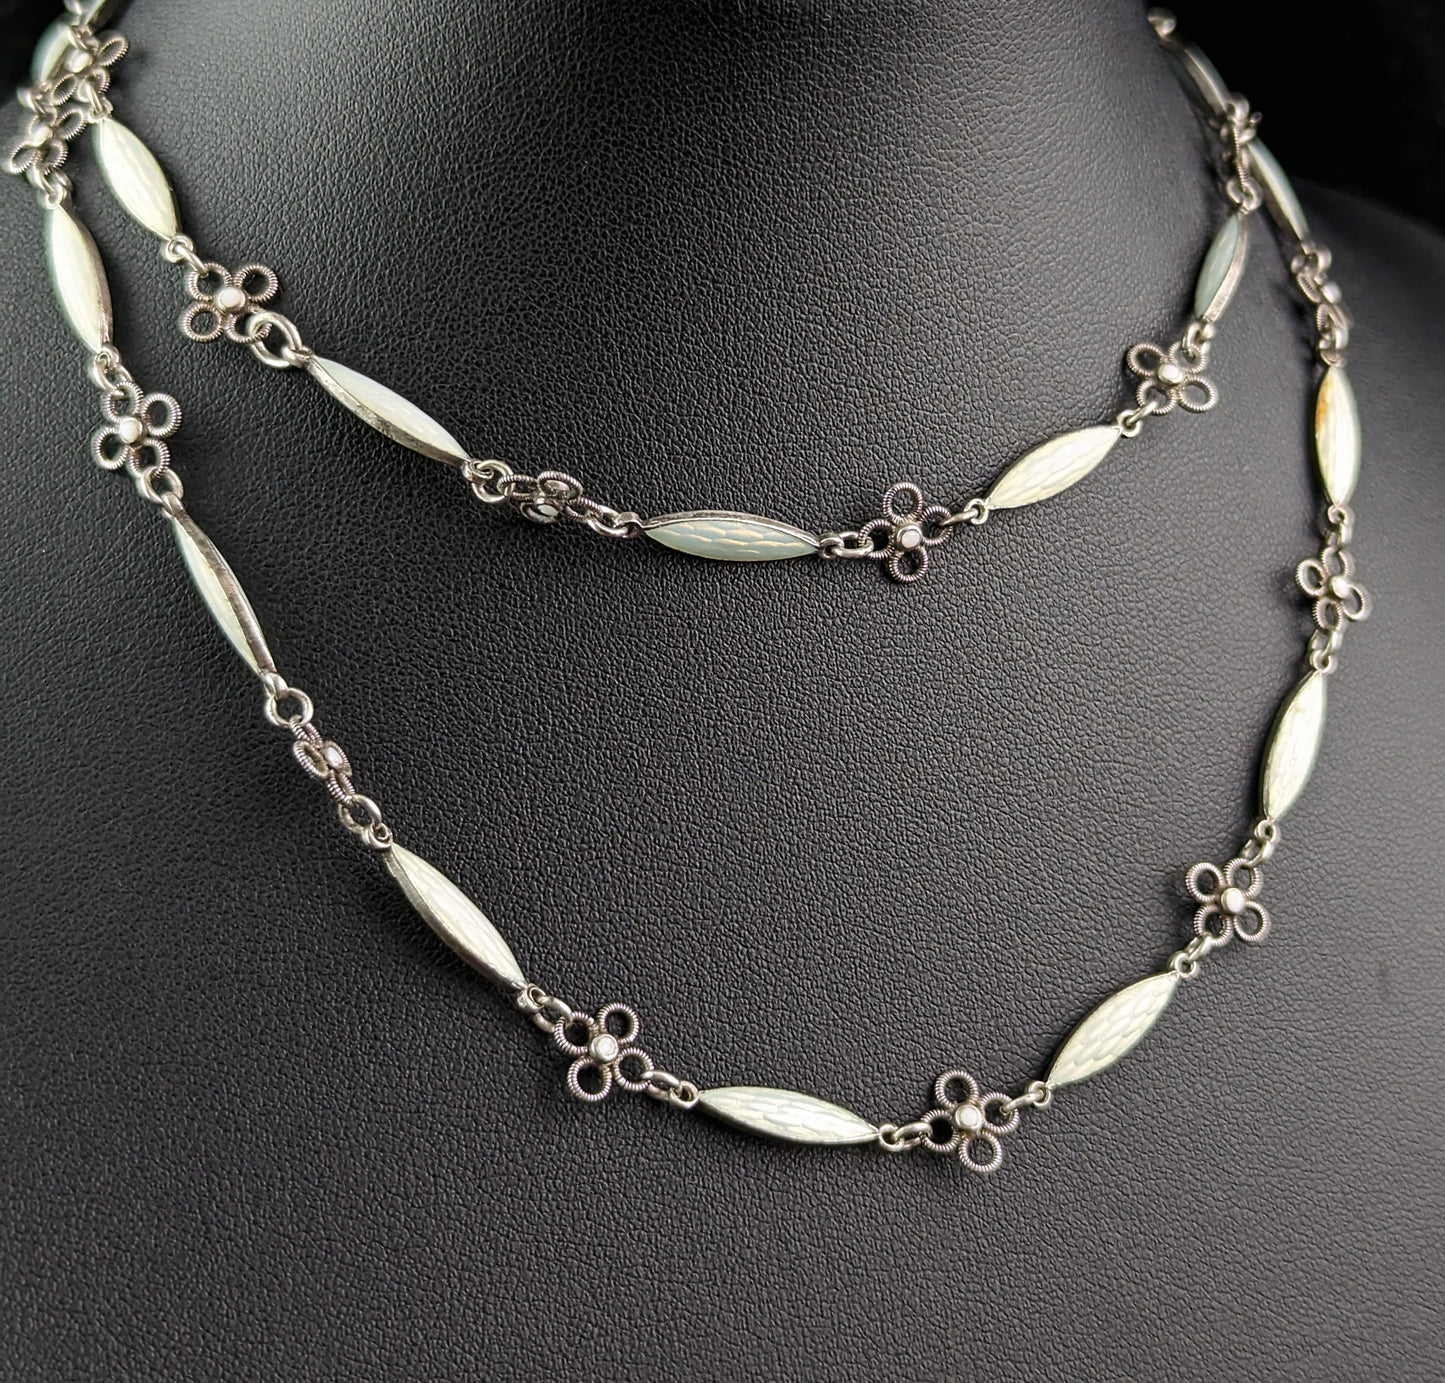 Vintage Art Deco sterling silver and enamel necklace, Floral link chain